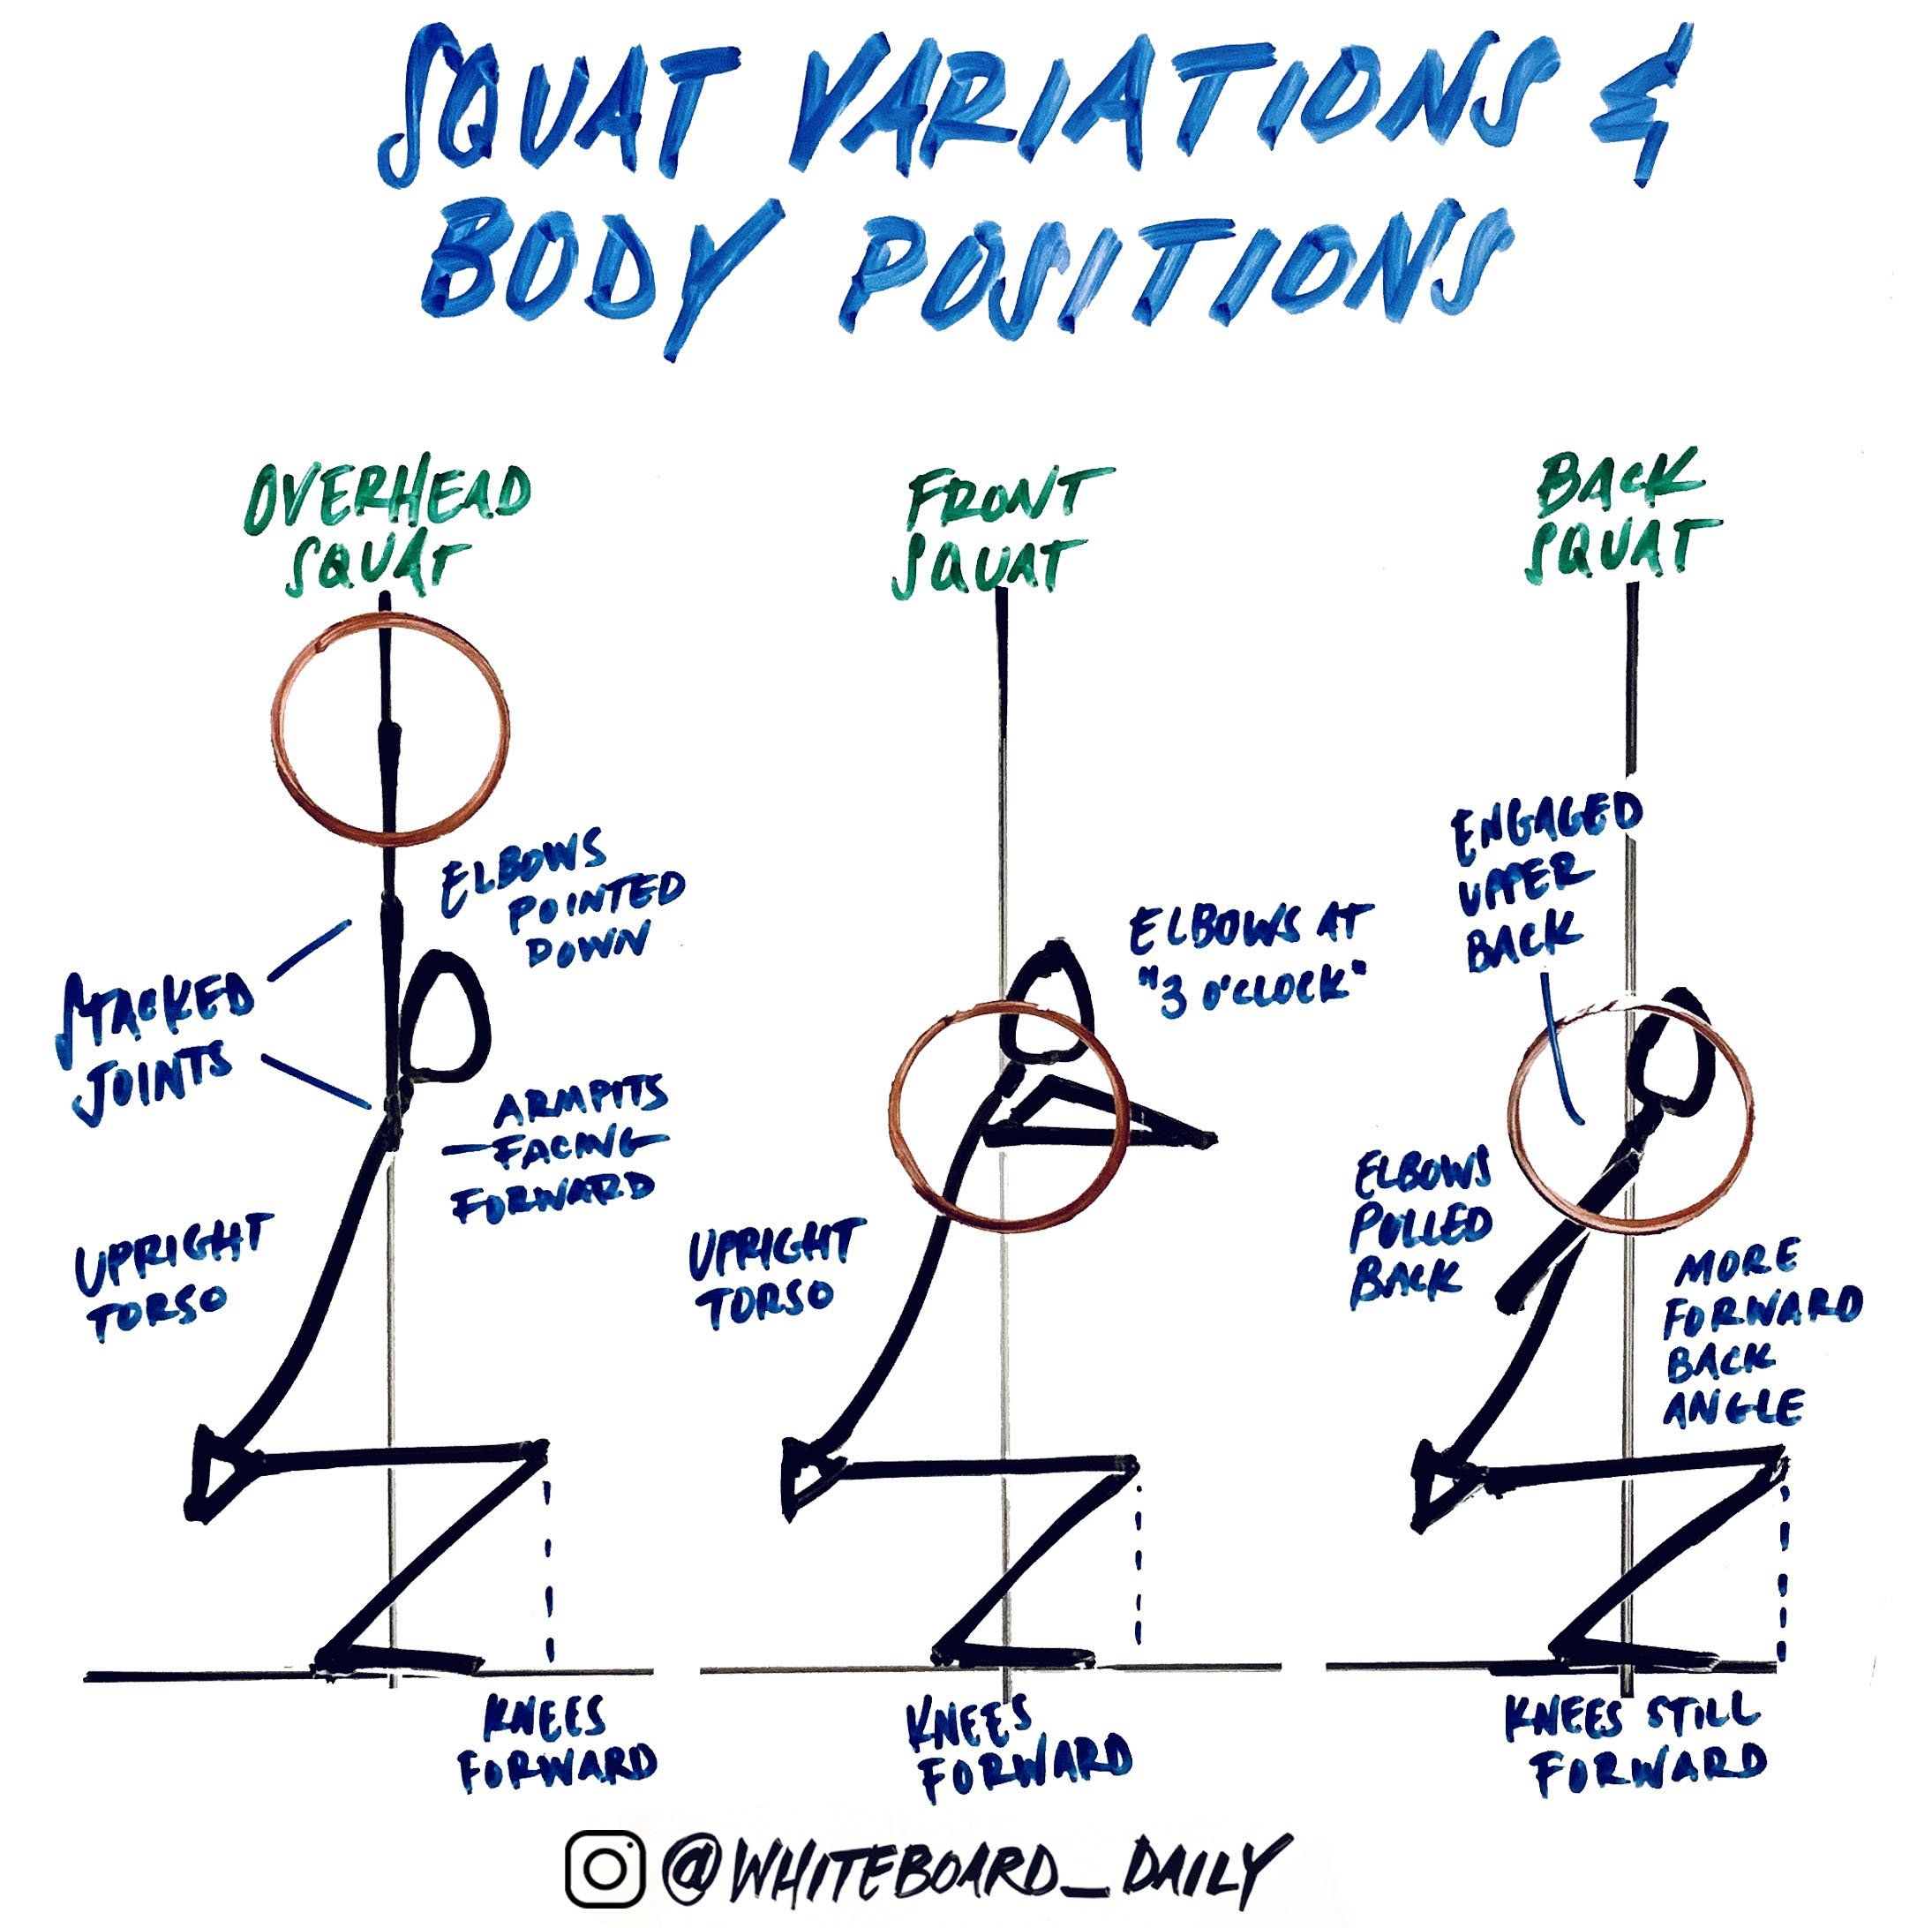 Digital Sketch: Squat Variations and Body Positions